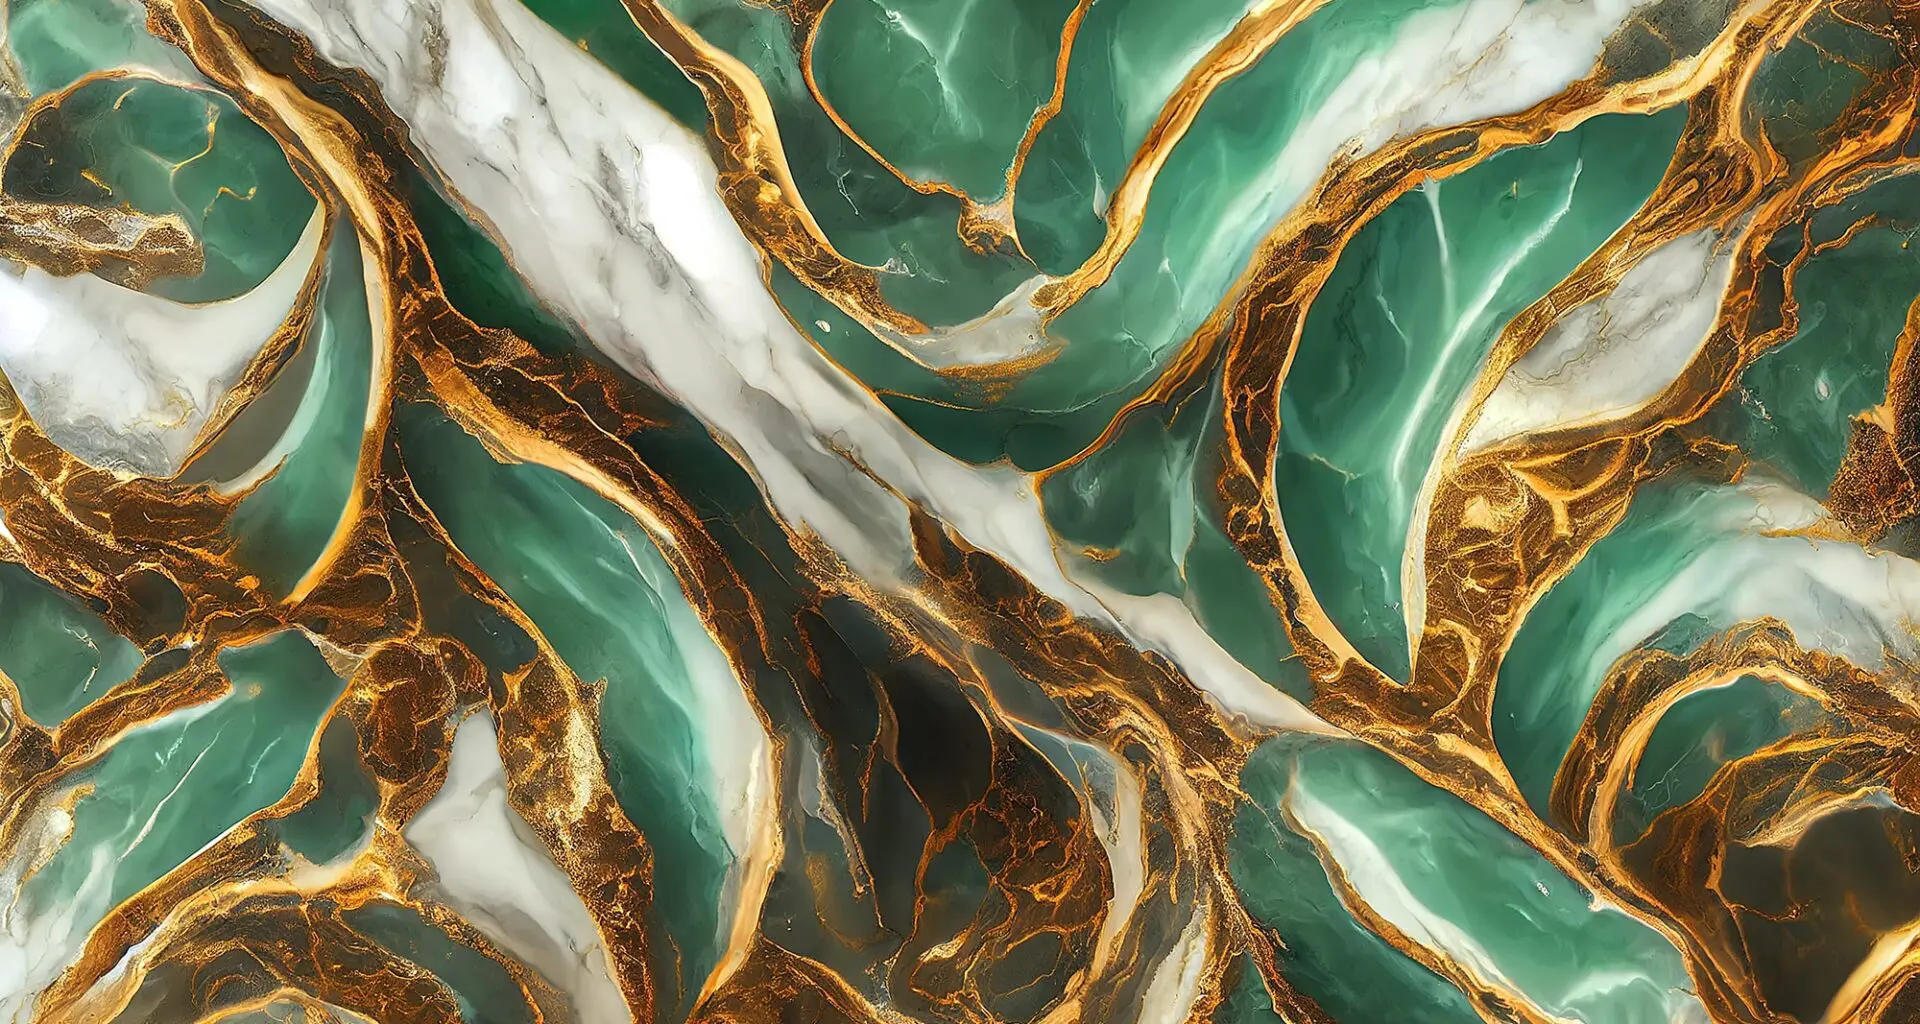 Background of the marble pattern in Teal and Gold style, Digital Generate Image